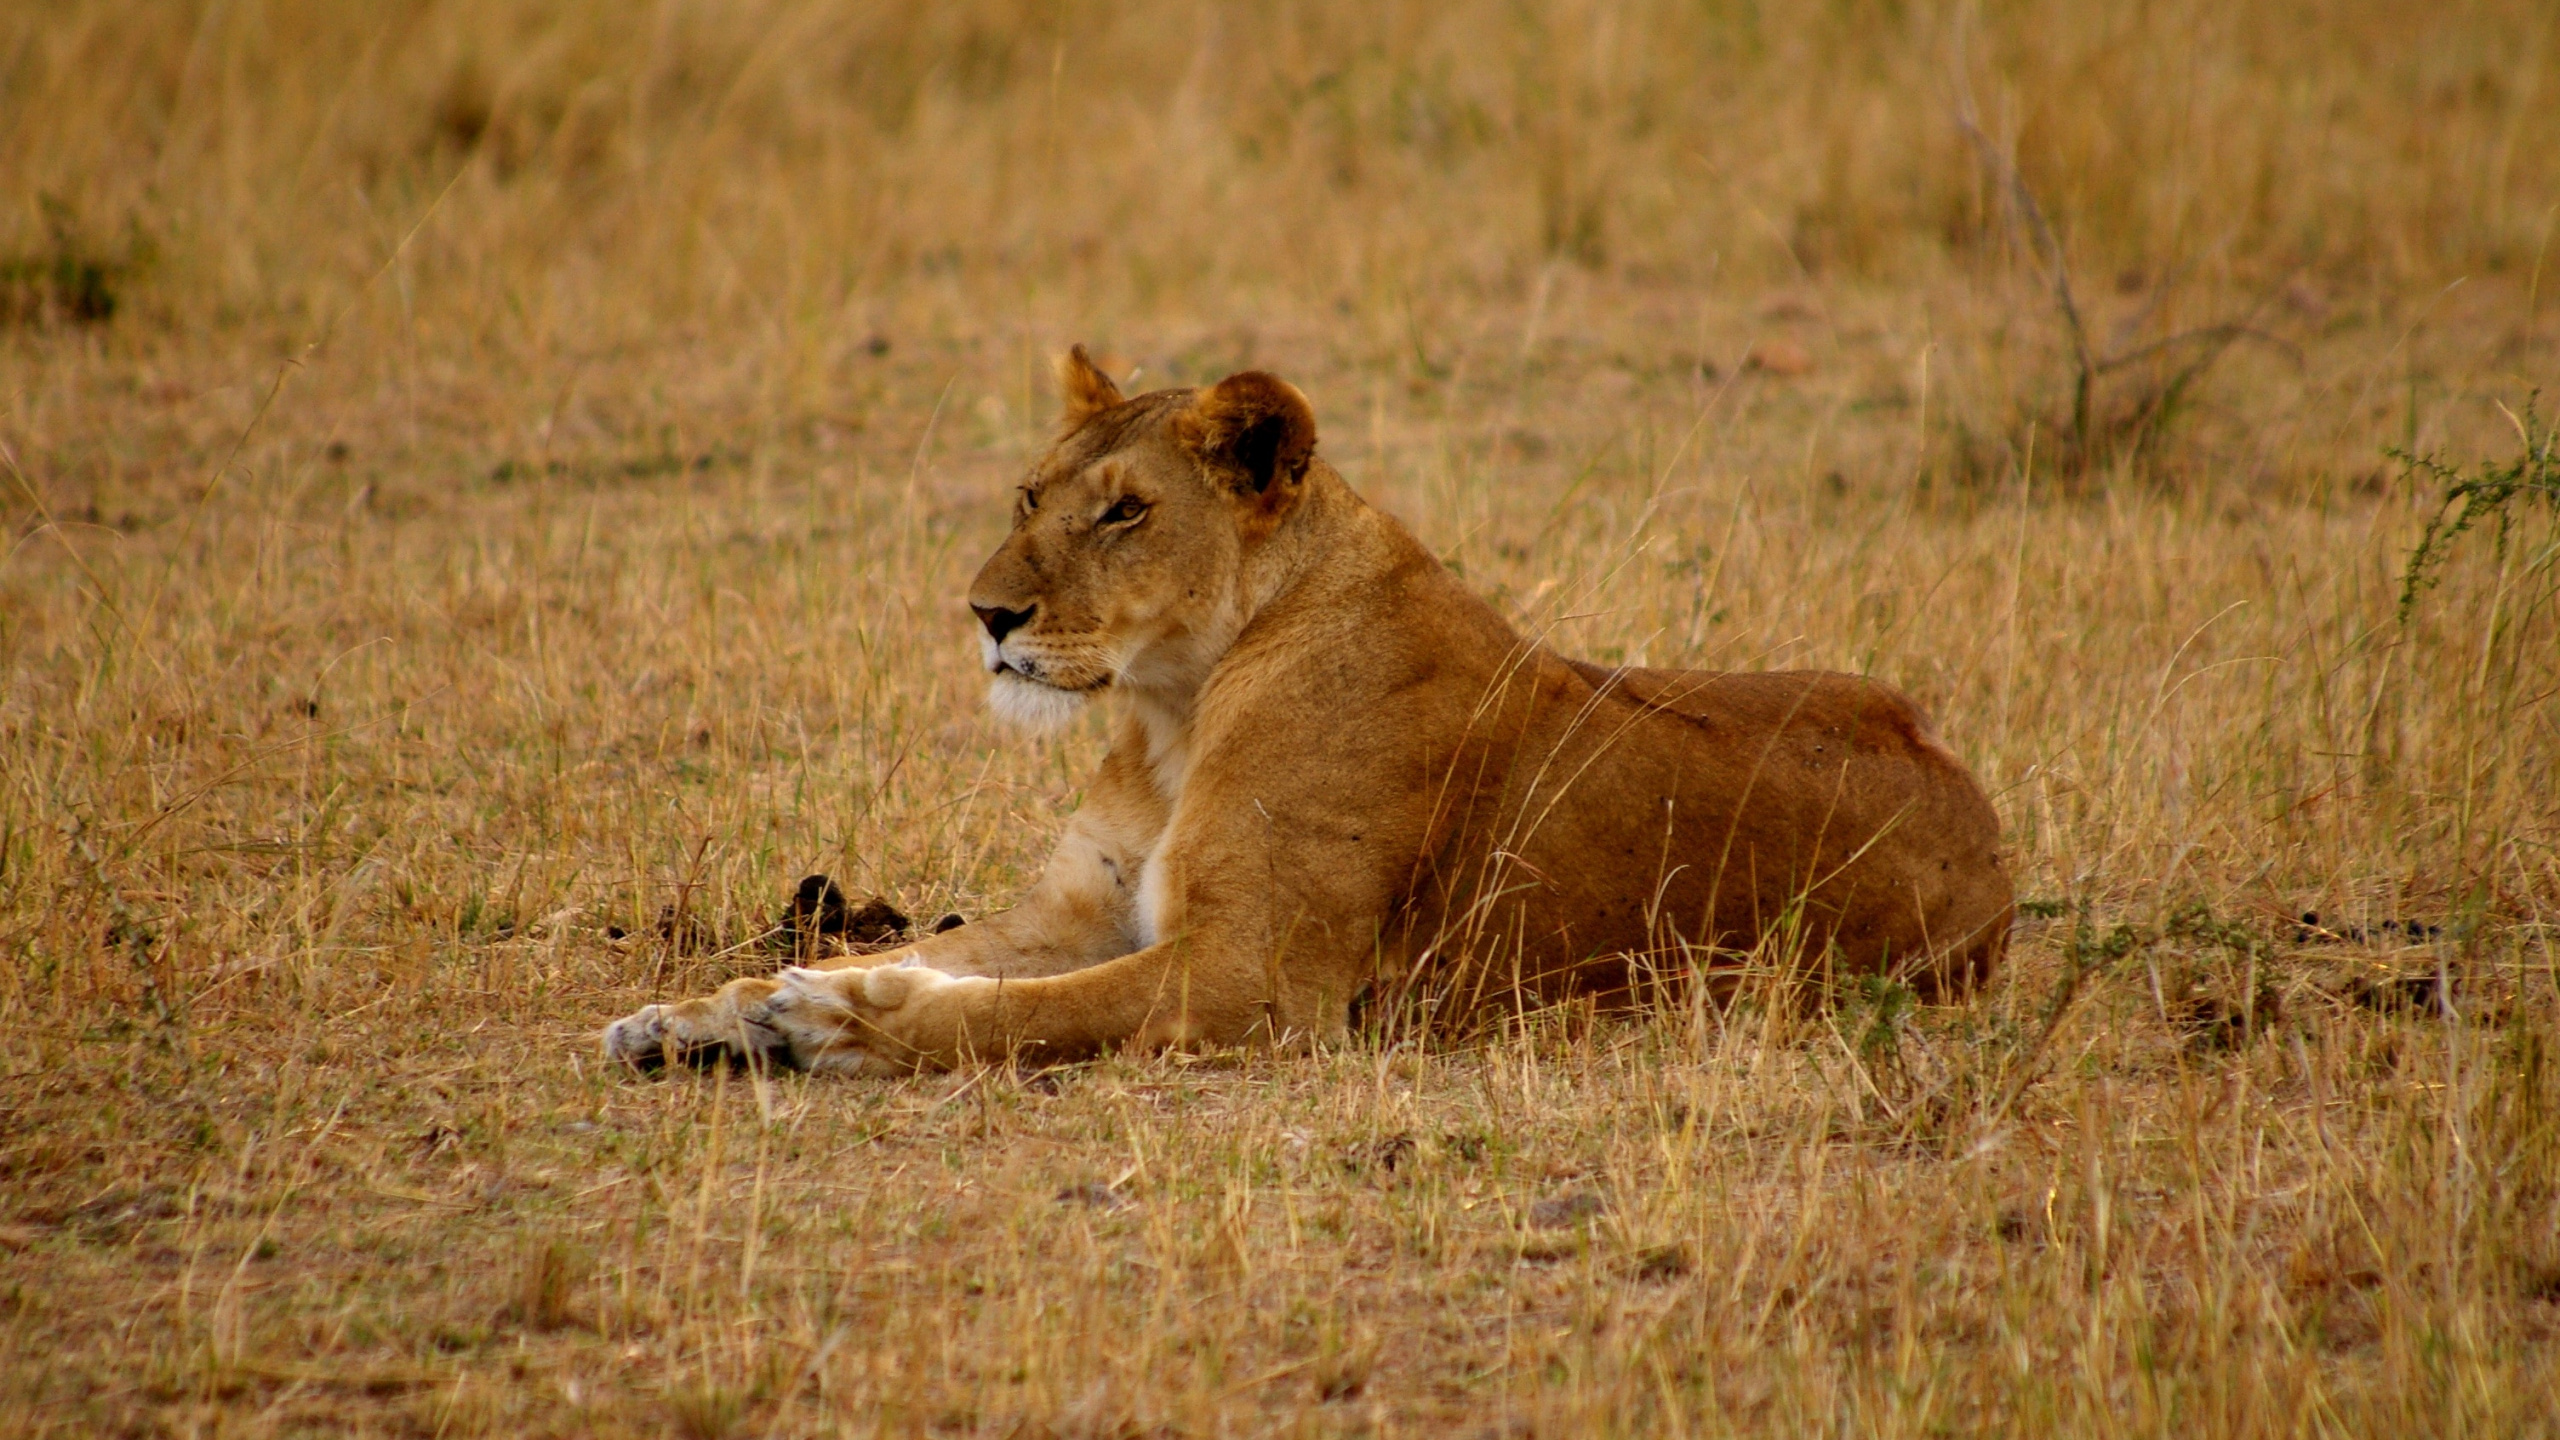 Brown Lioness on Brown Grass Field During Daytime. Wallpaper in 2560x1440 Resolution